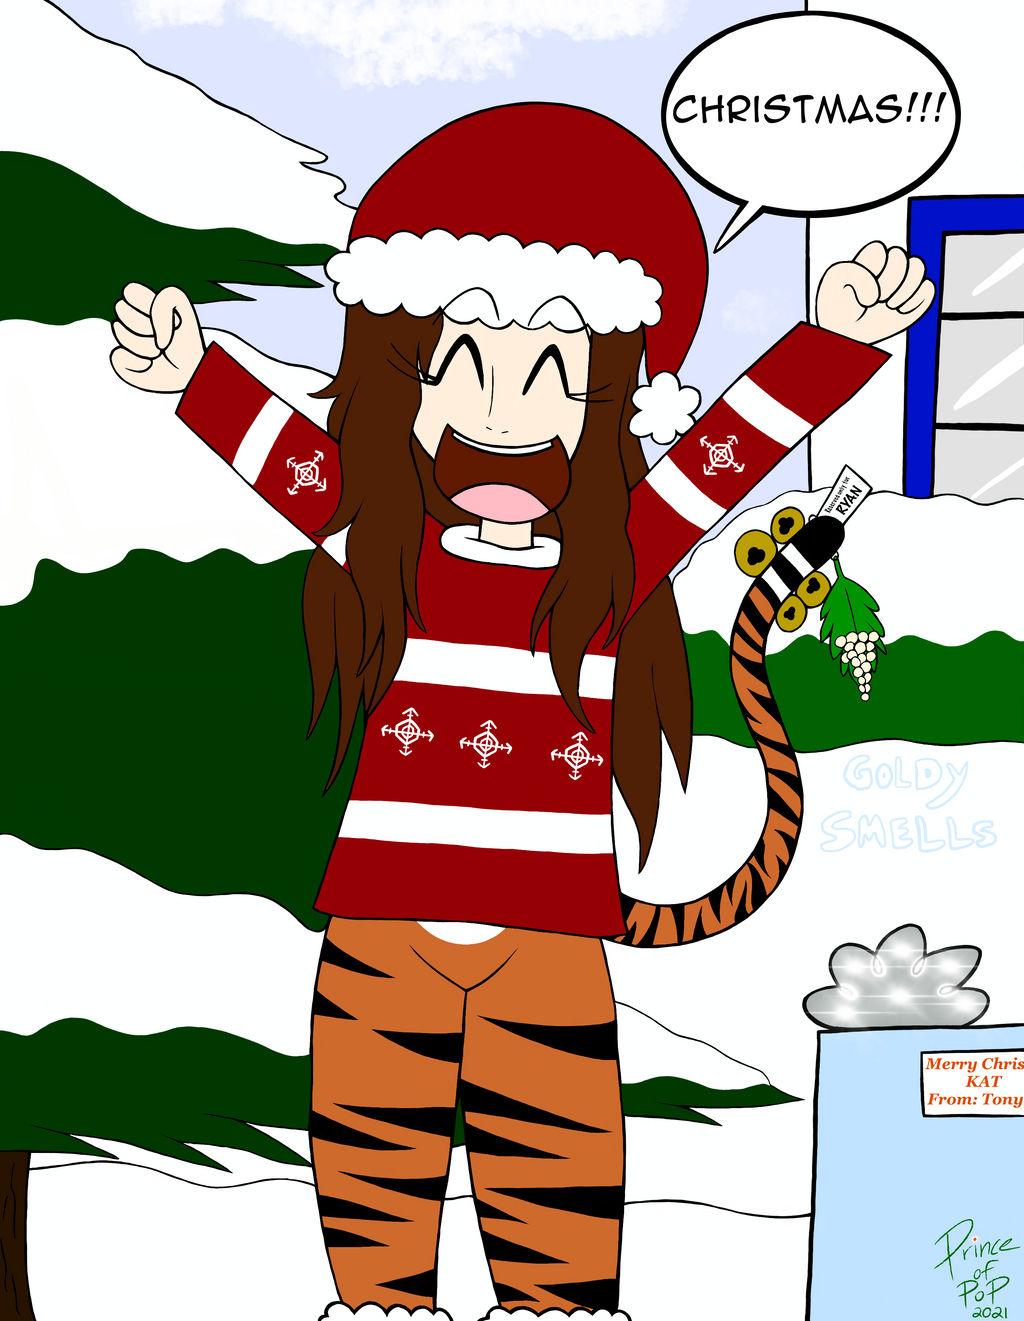 tina_tiger_s_christmas_time_by_prince_of_pop_dewccl3-fullview.jpg